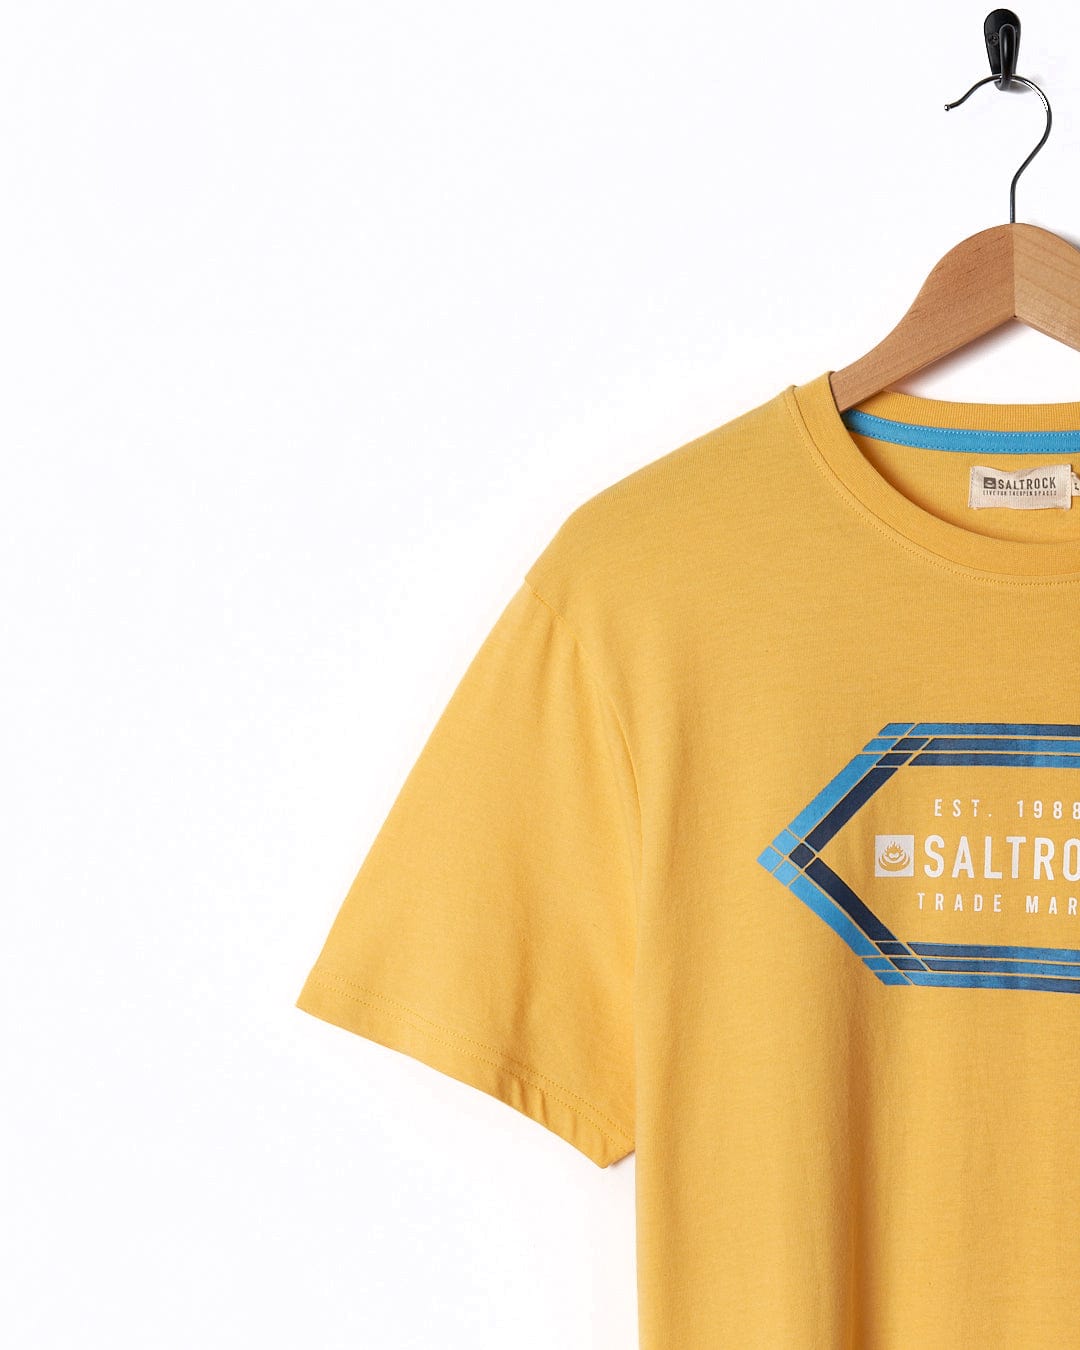 A Saltrock Gradient Hex - Mens Short Sleeve T-Shirt - Yellow with a blue logo on it.